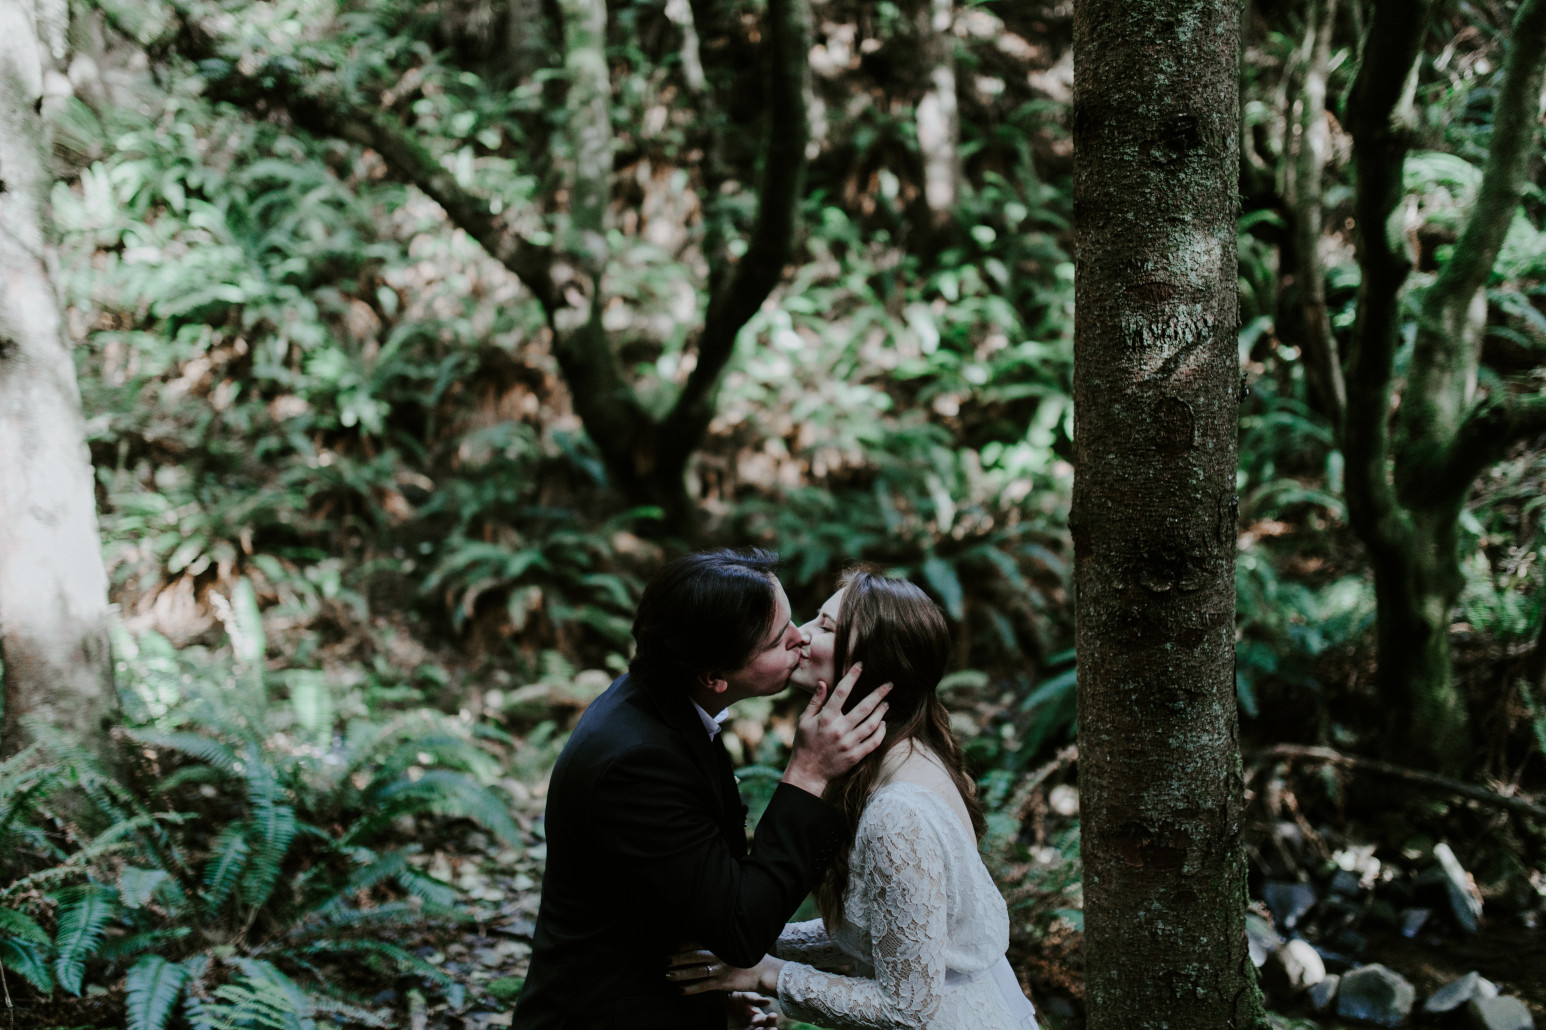 Nicole and Vlad kiss. Elopement wedding photography at Cannon Beach by Sienna Plus Josh.